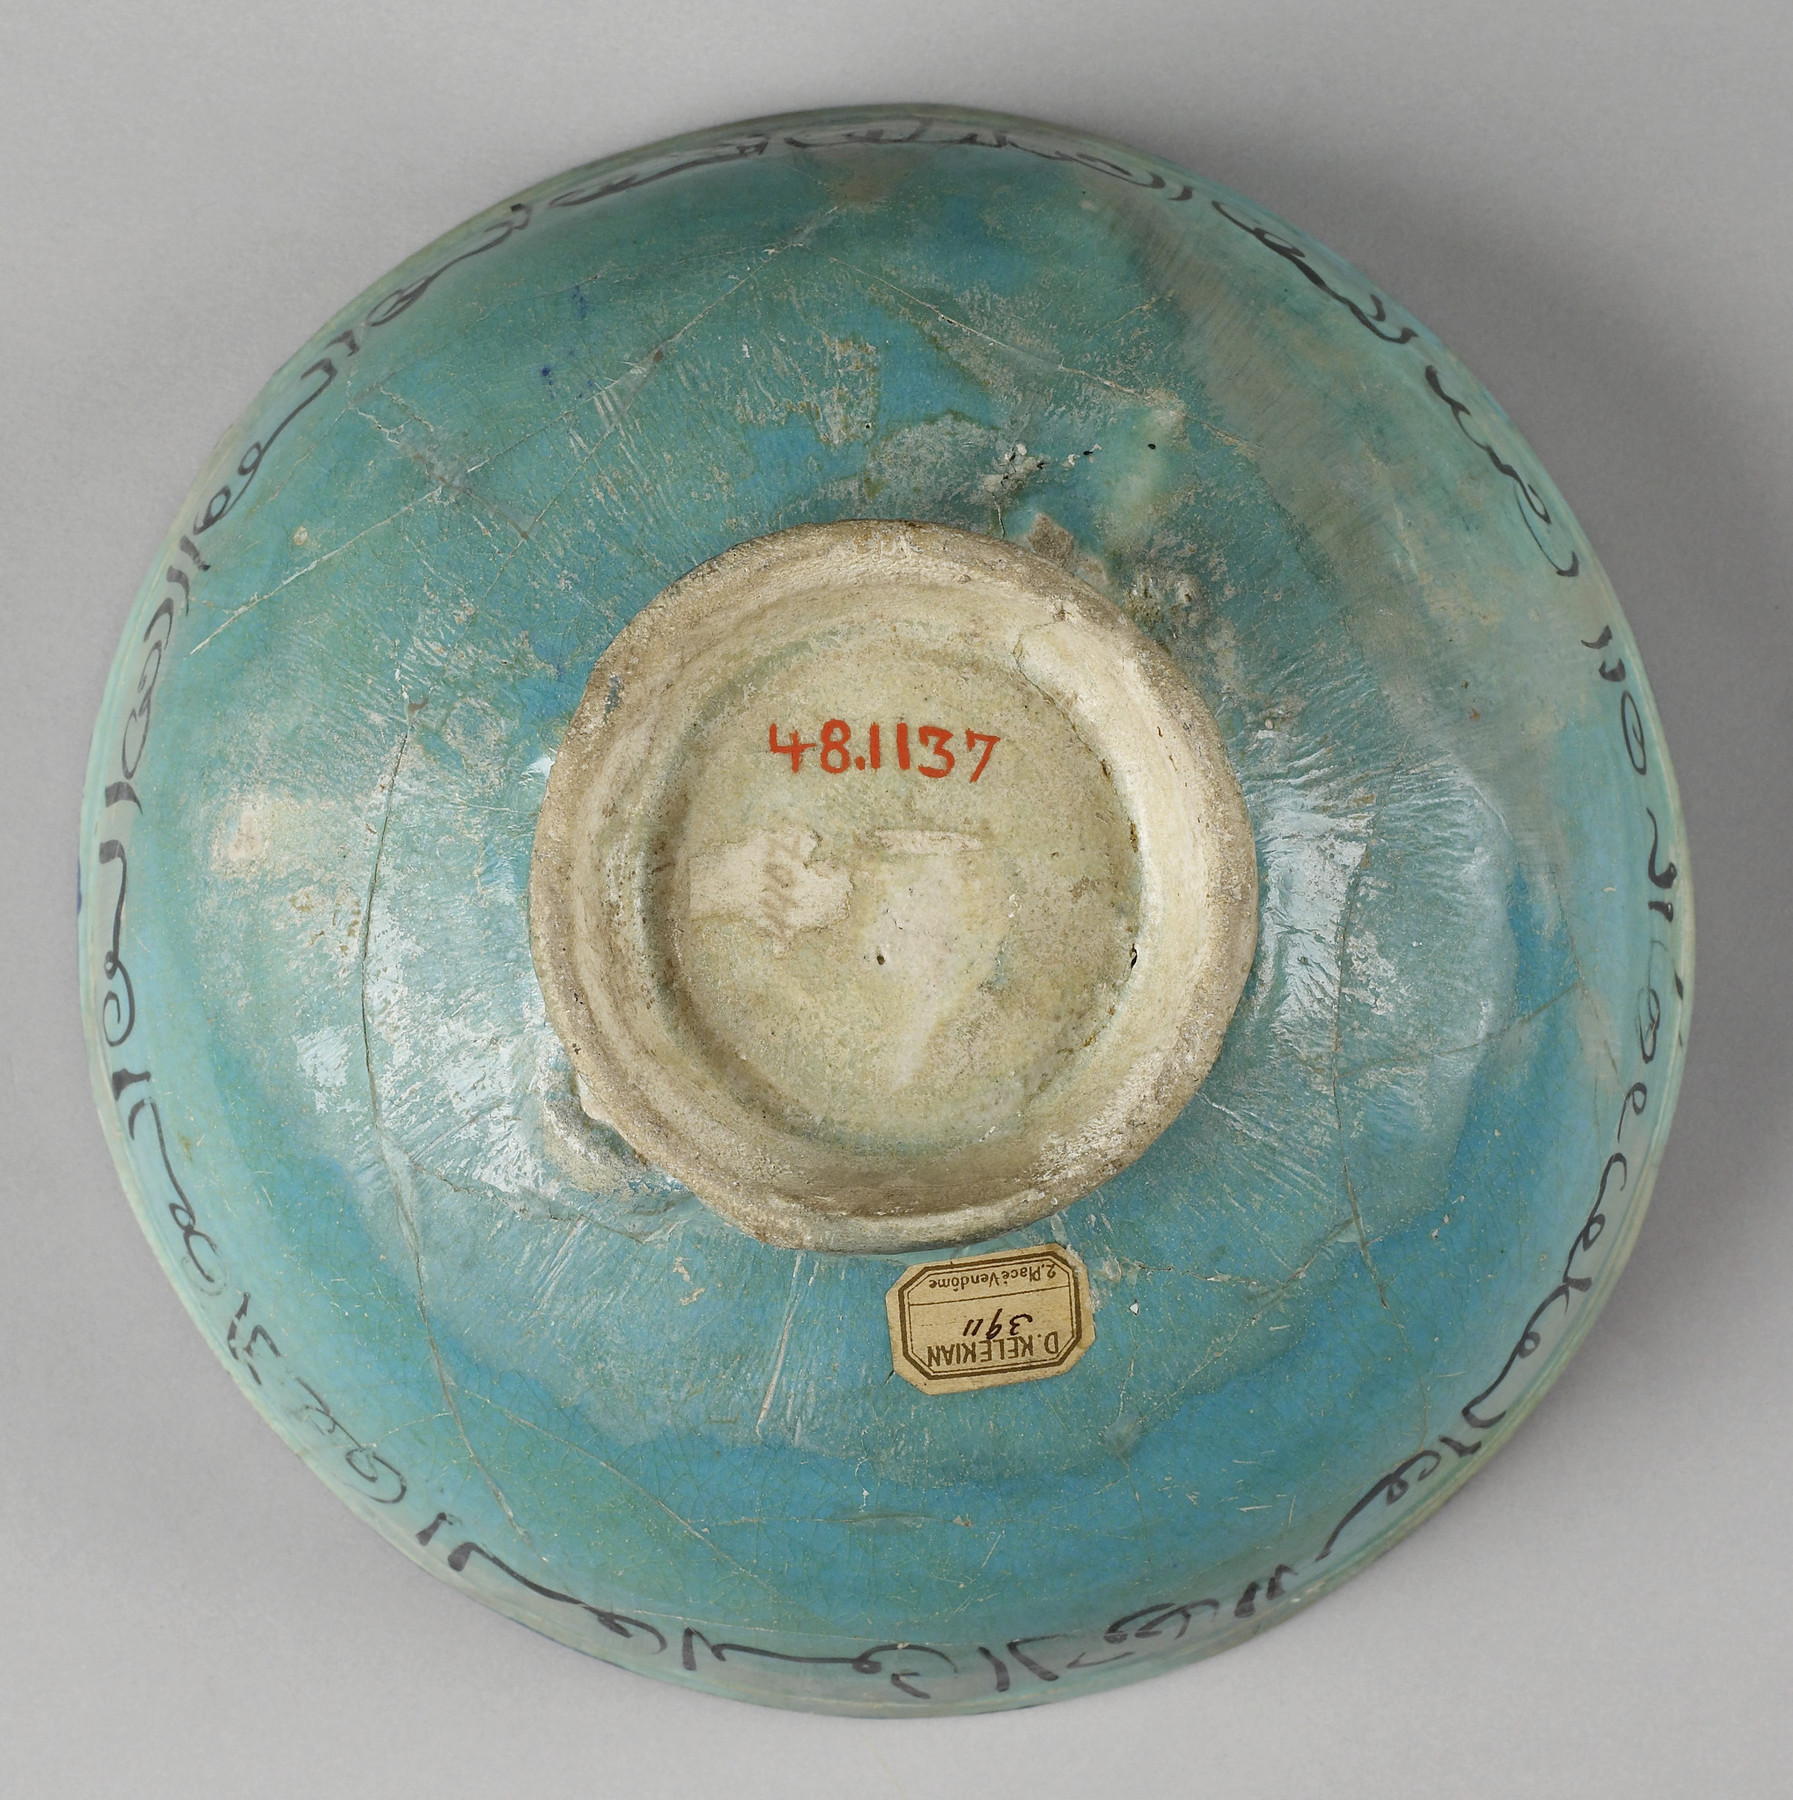 Image for Bowl with Seated Figures and Horseman